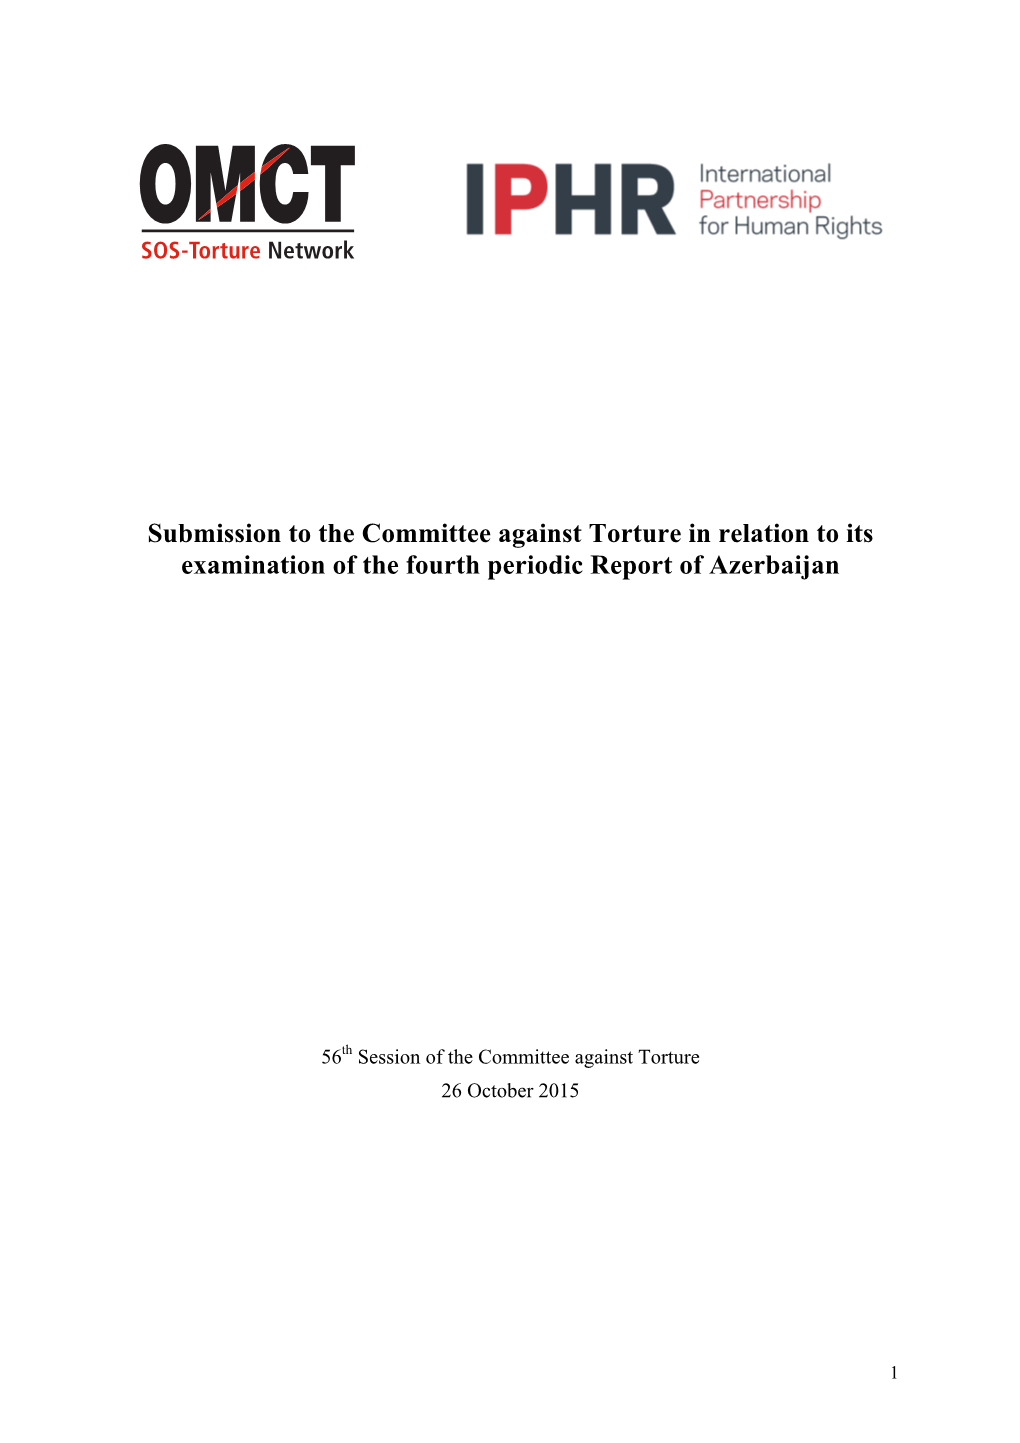 Submission to the Committee Against Torture in Relation to Its Examination of the Fourth Periodic Report of Azerbaijan